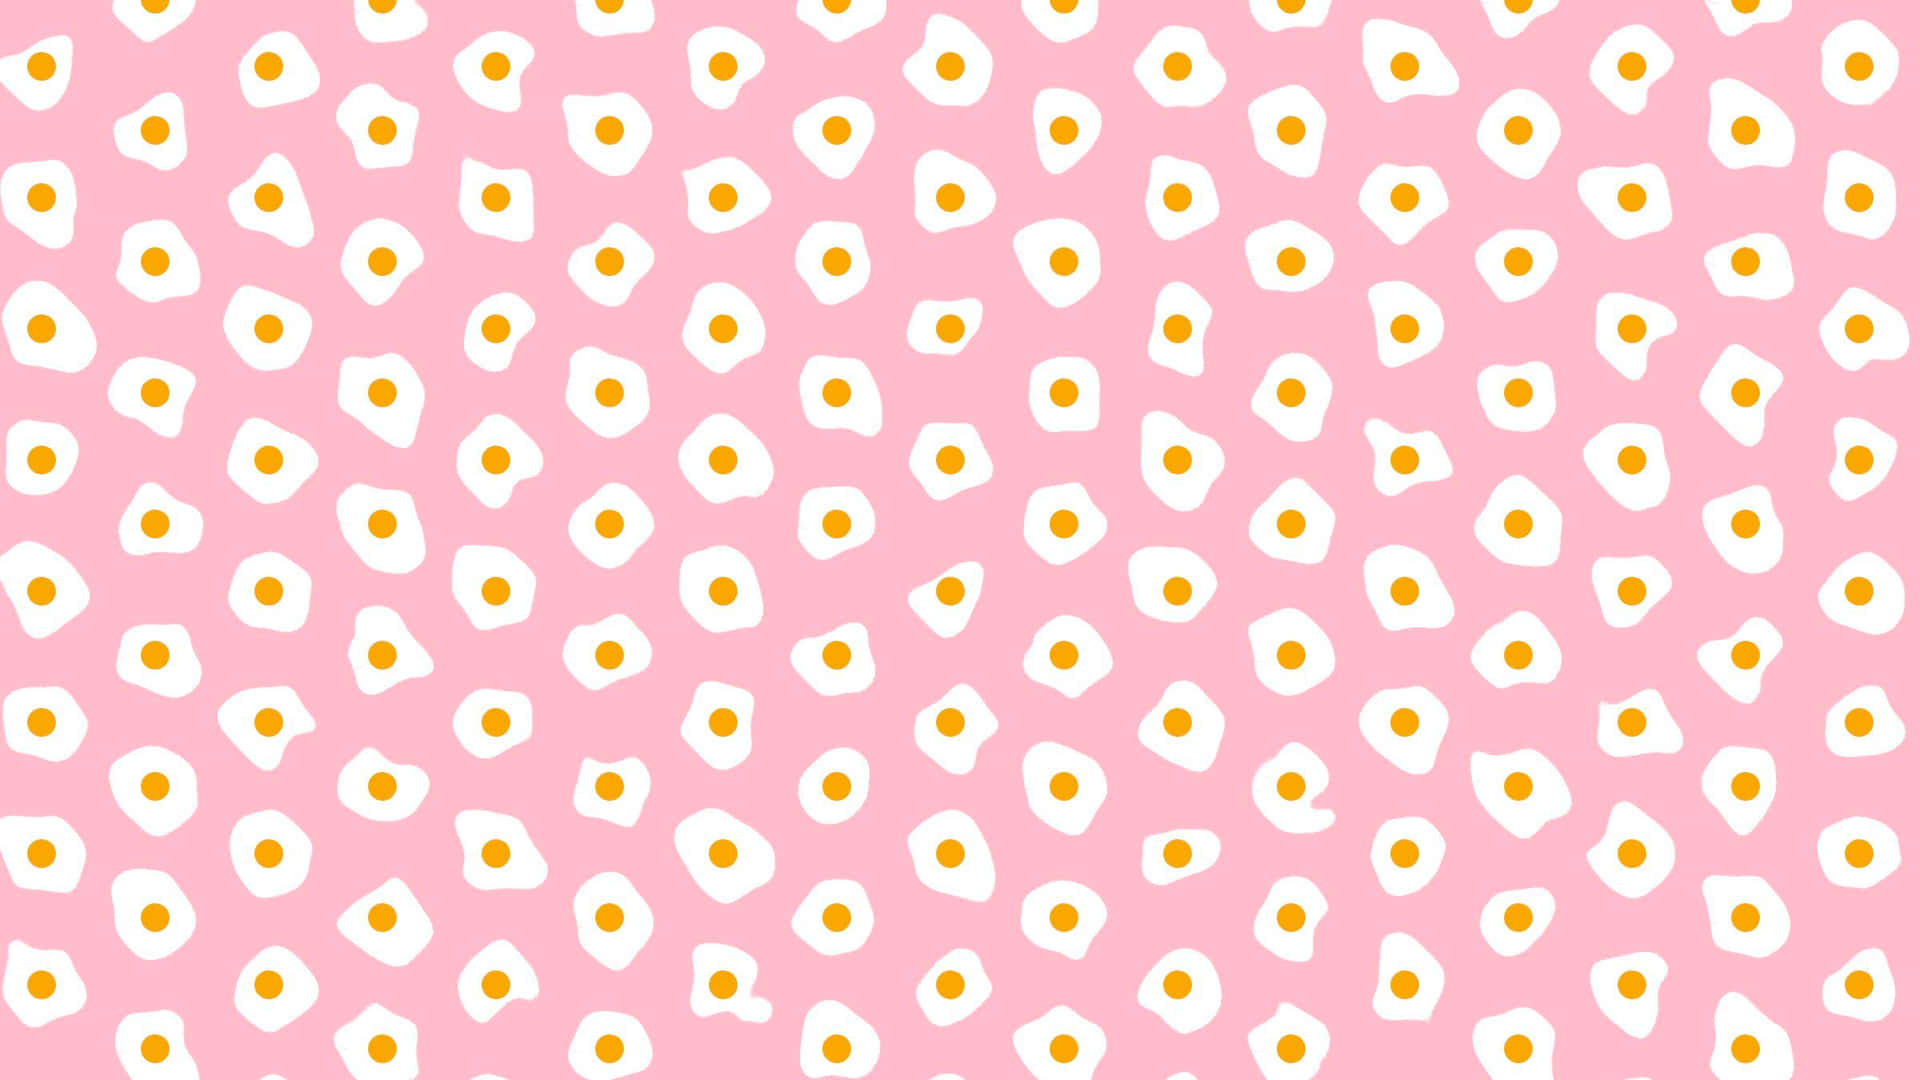 A Pink Background With White Dots